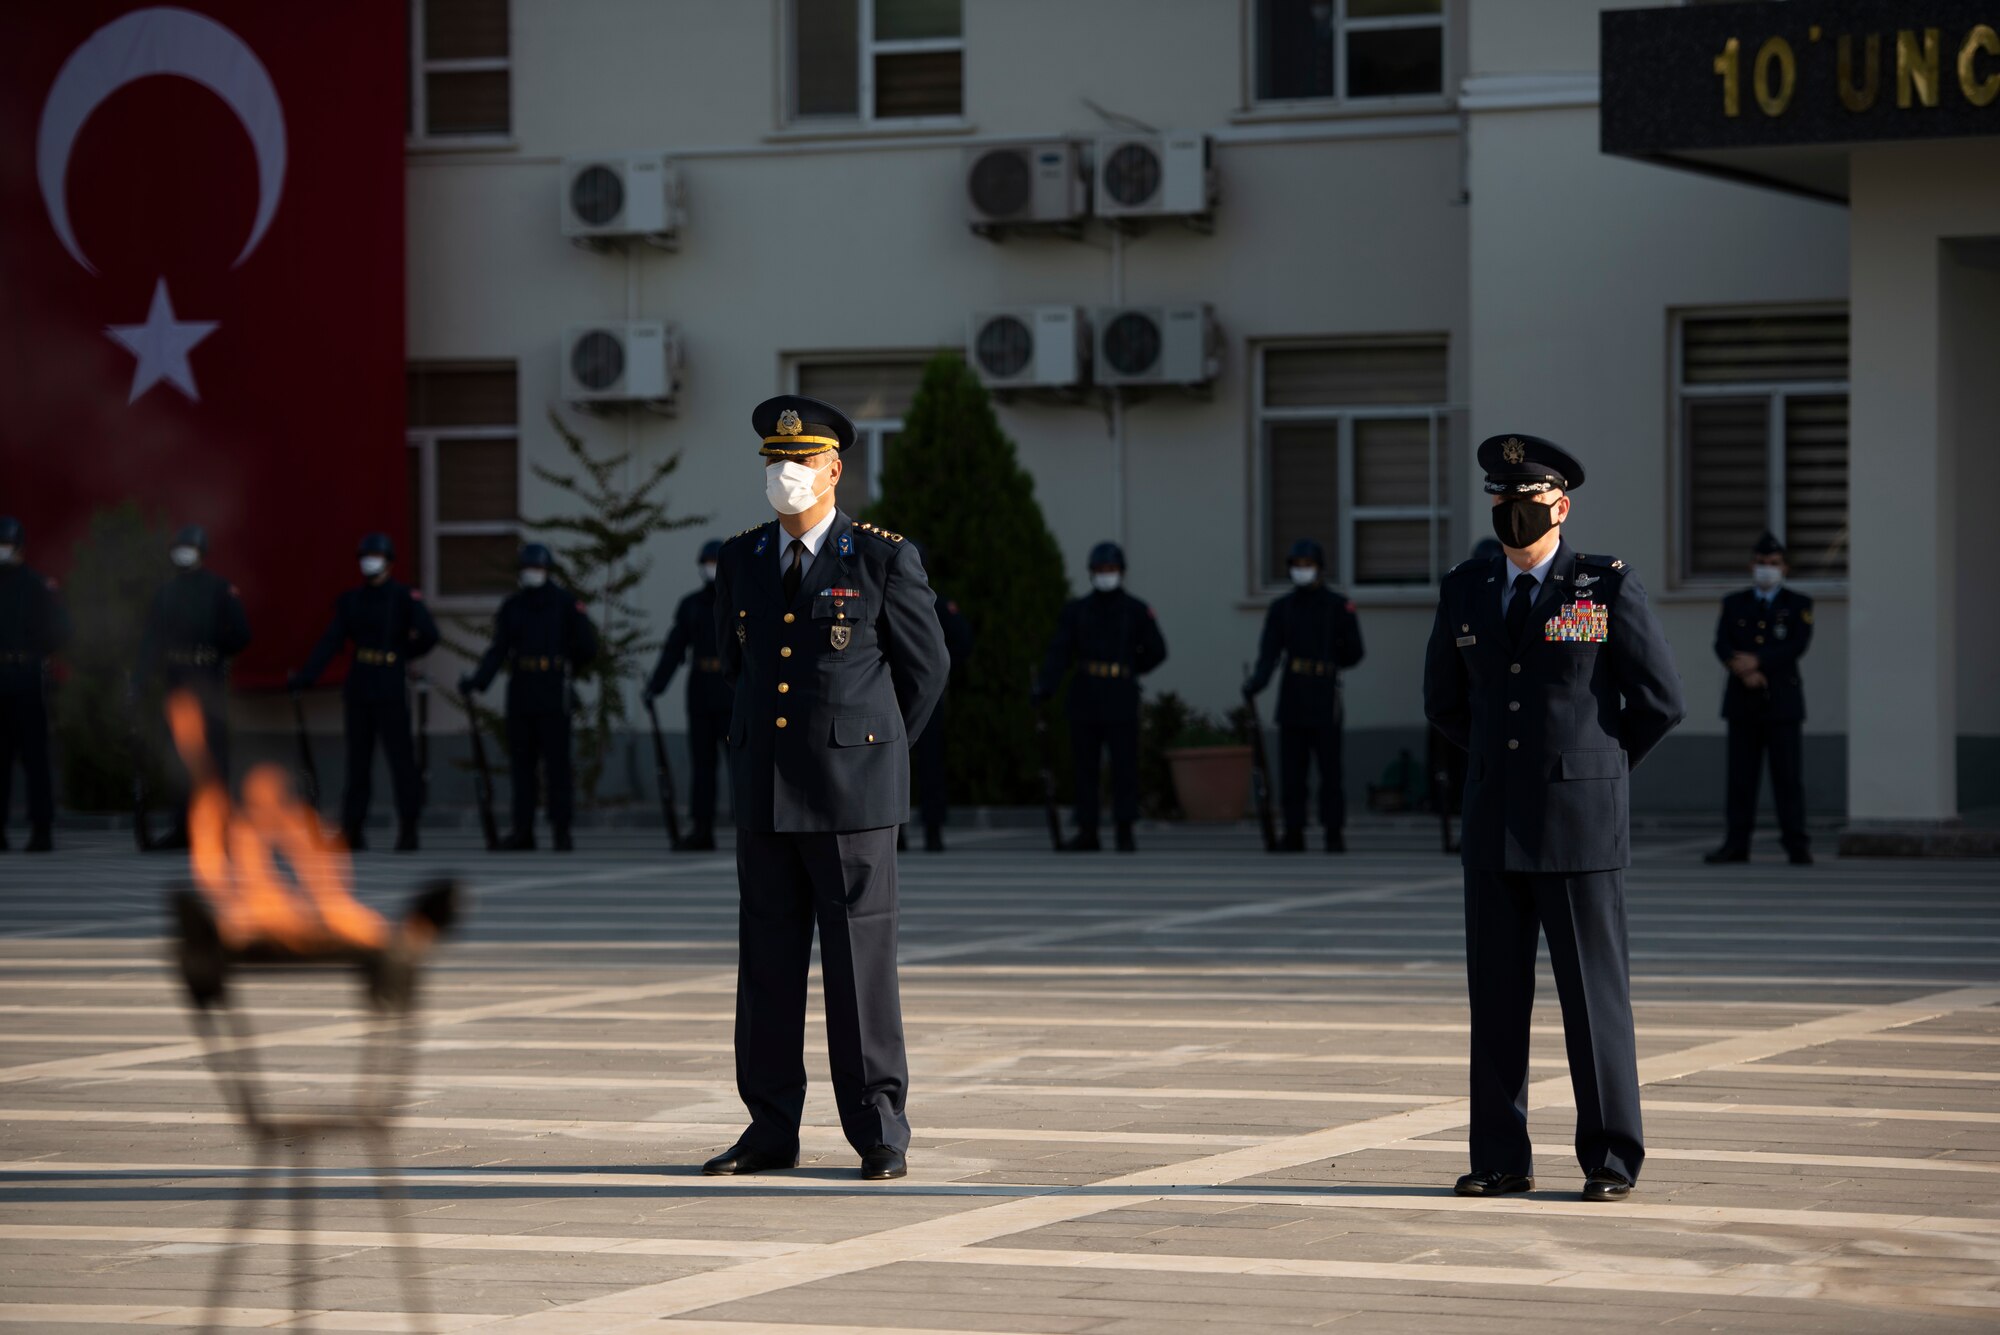 The 10th Tanker Base commander and the 39th Air Base Wing commander stand at parade rest during a ceremony.